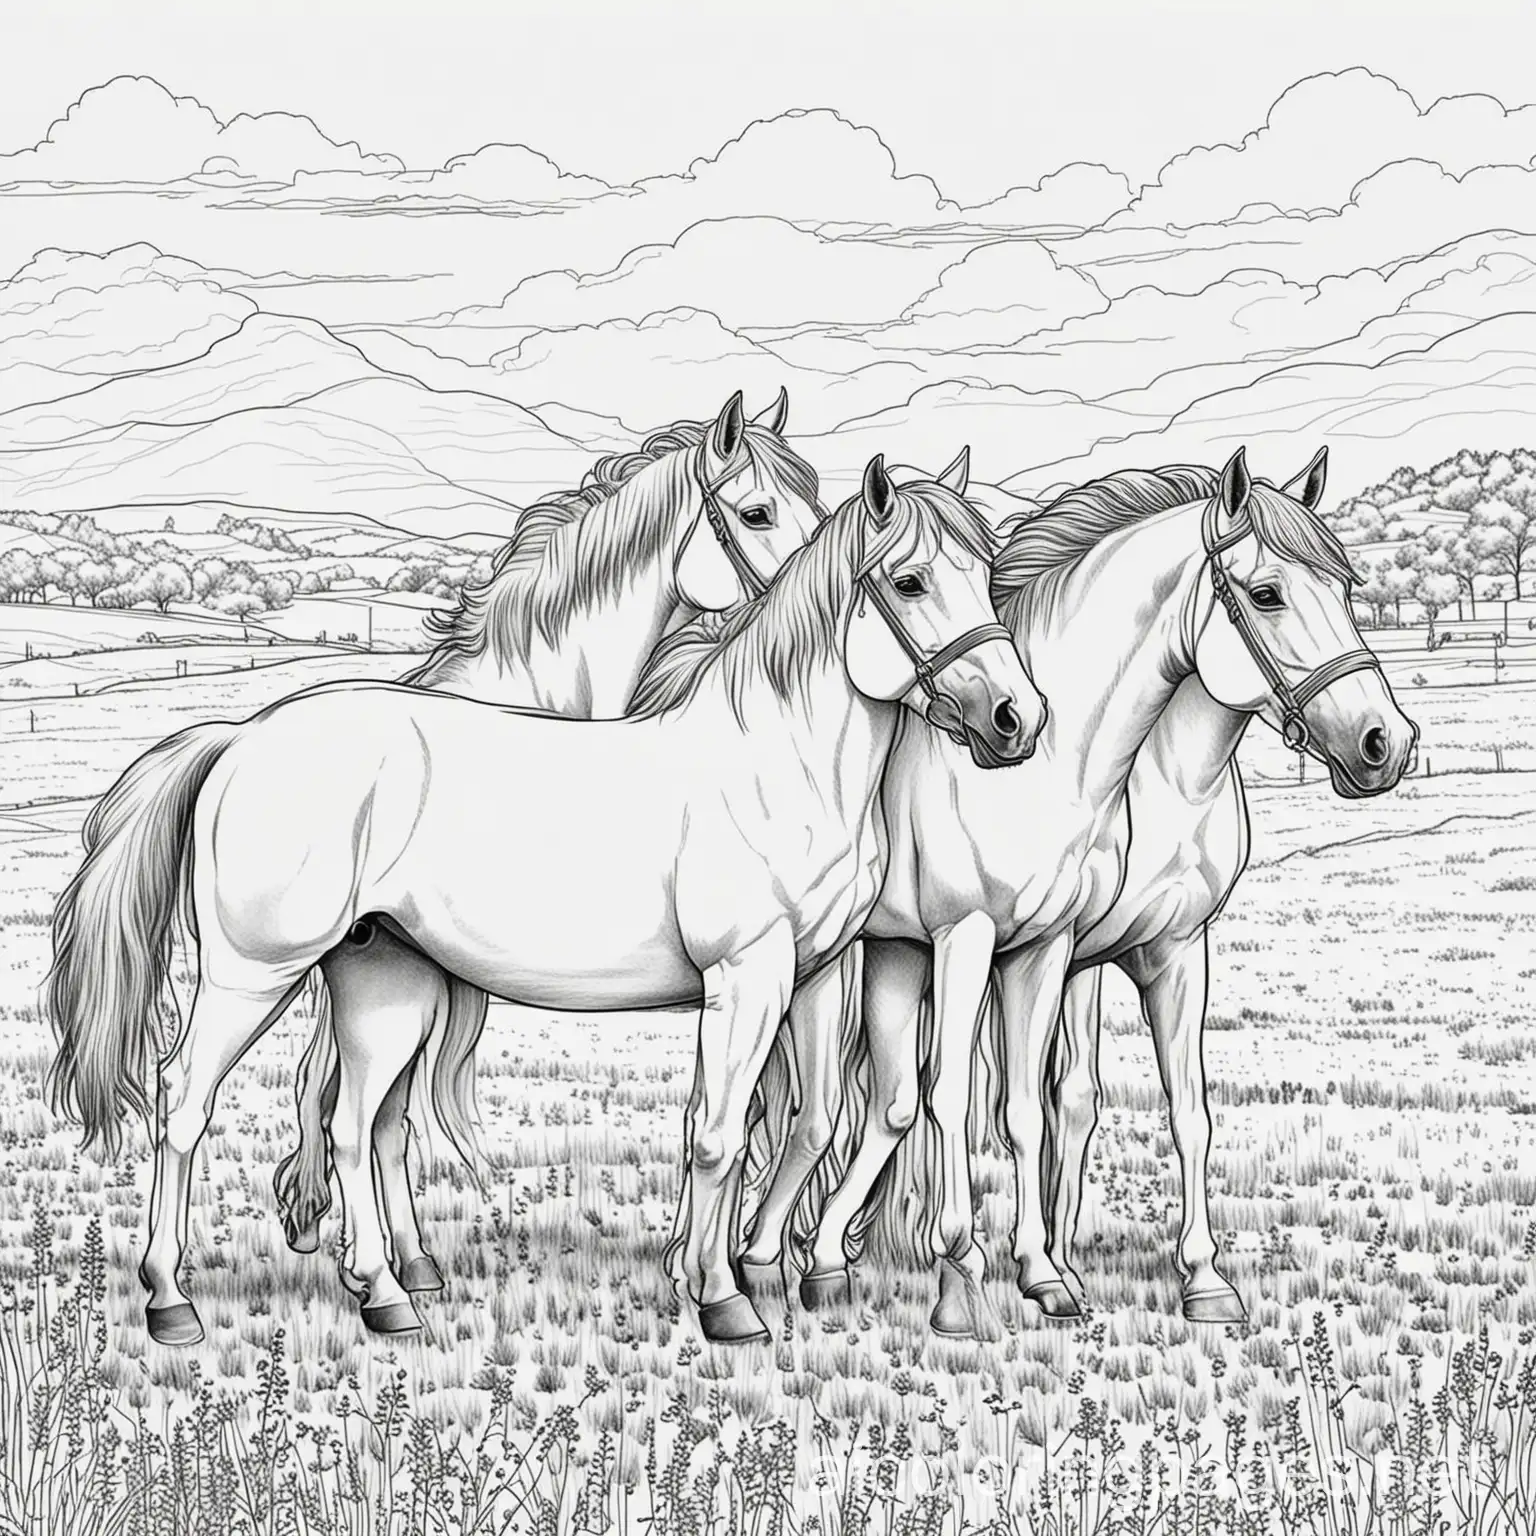 horses in field, Coloring Page, black and white, line art, white background, Simplicity, Ample White Space. The background of the coloring page is plain white to make it easy for young children to color within the lines. The outlines of all the subjects are easy to distinguish, making it simple for kids to color without too much difficulty